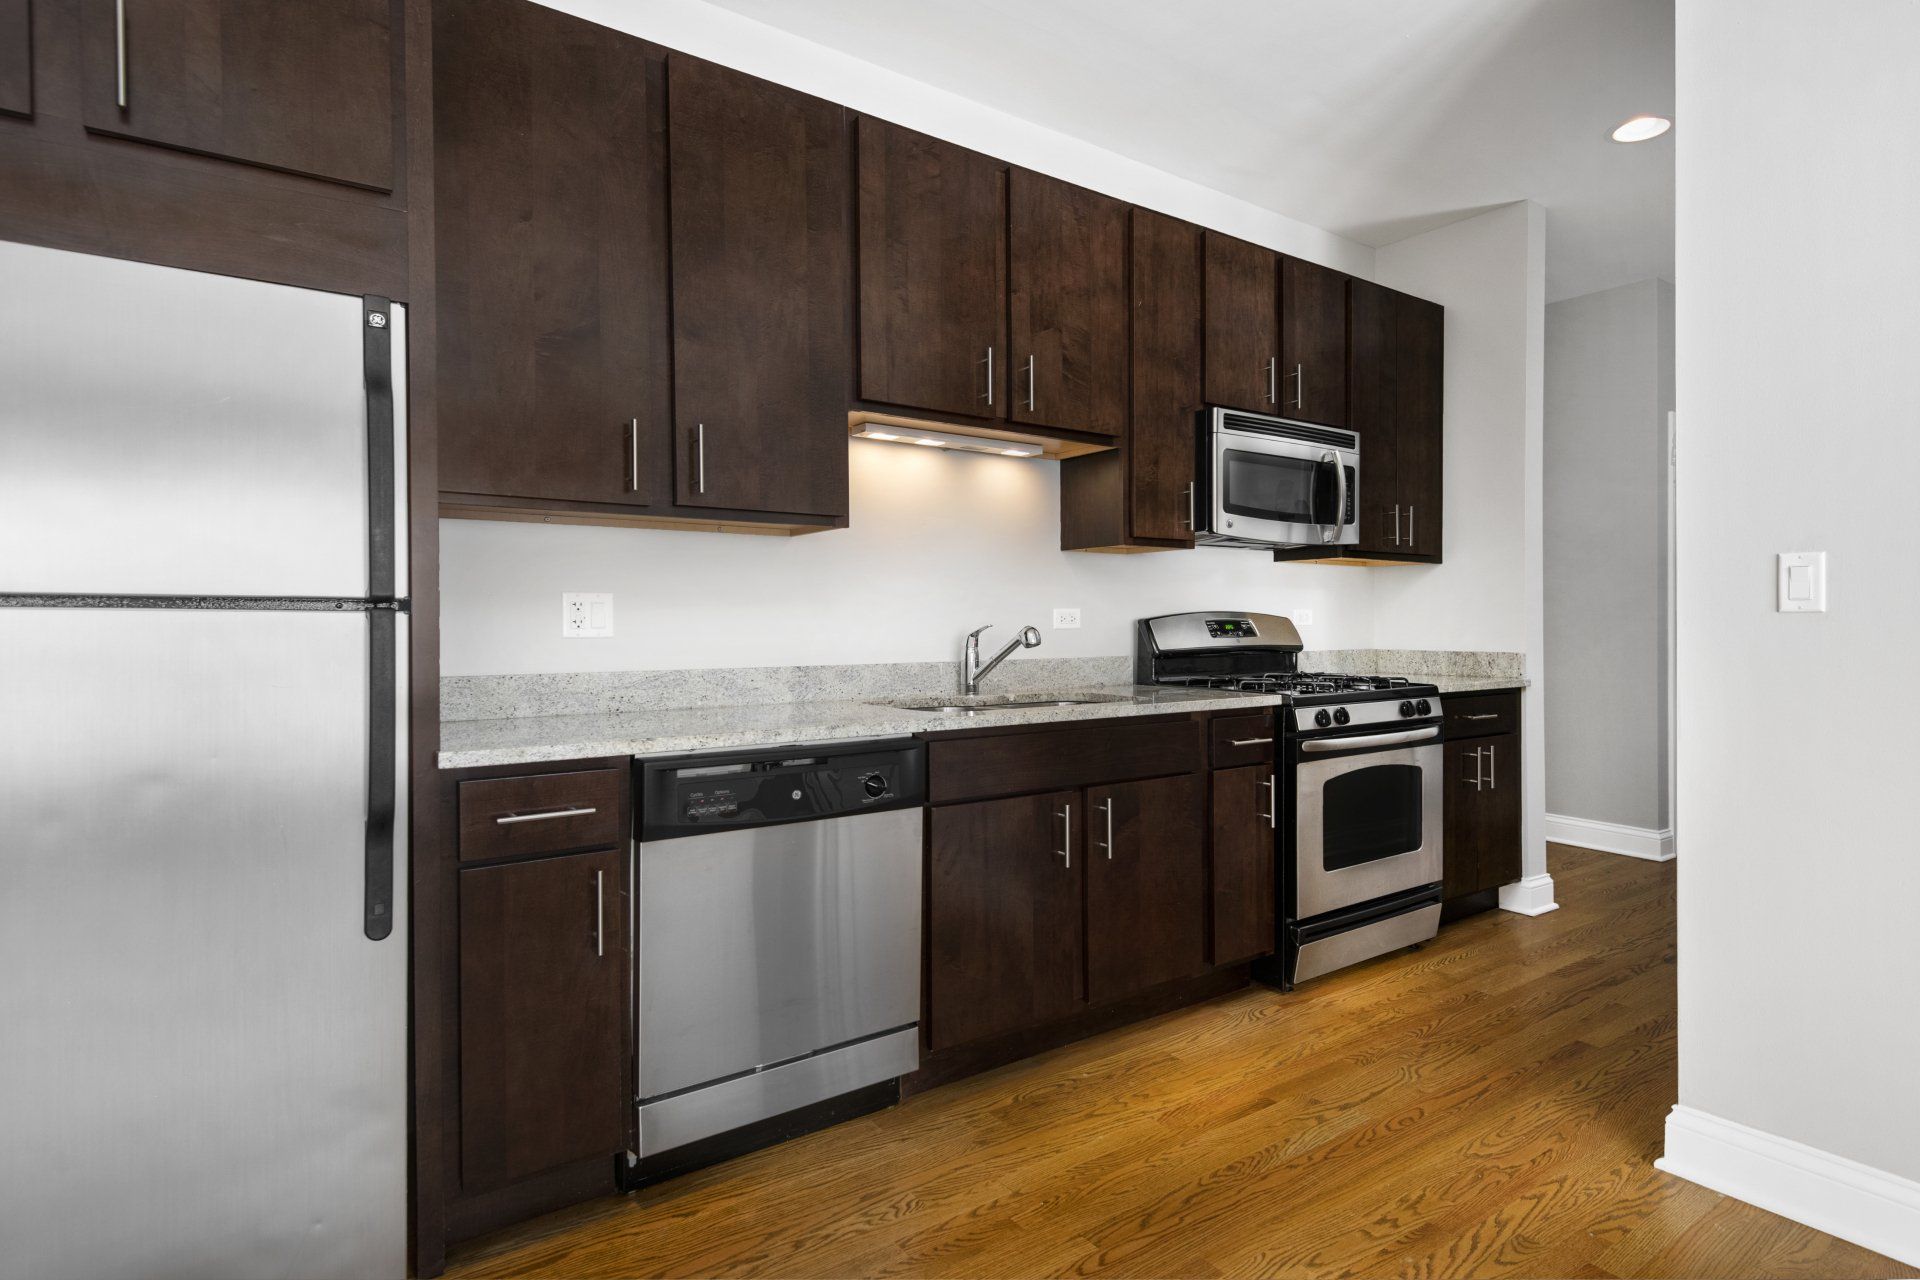 A kitchen with stainless steel appliances and brown cabinets.